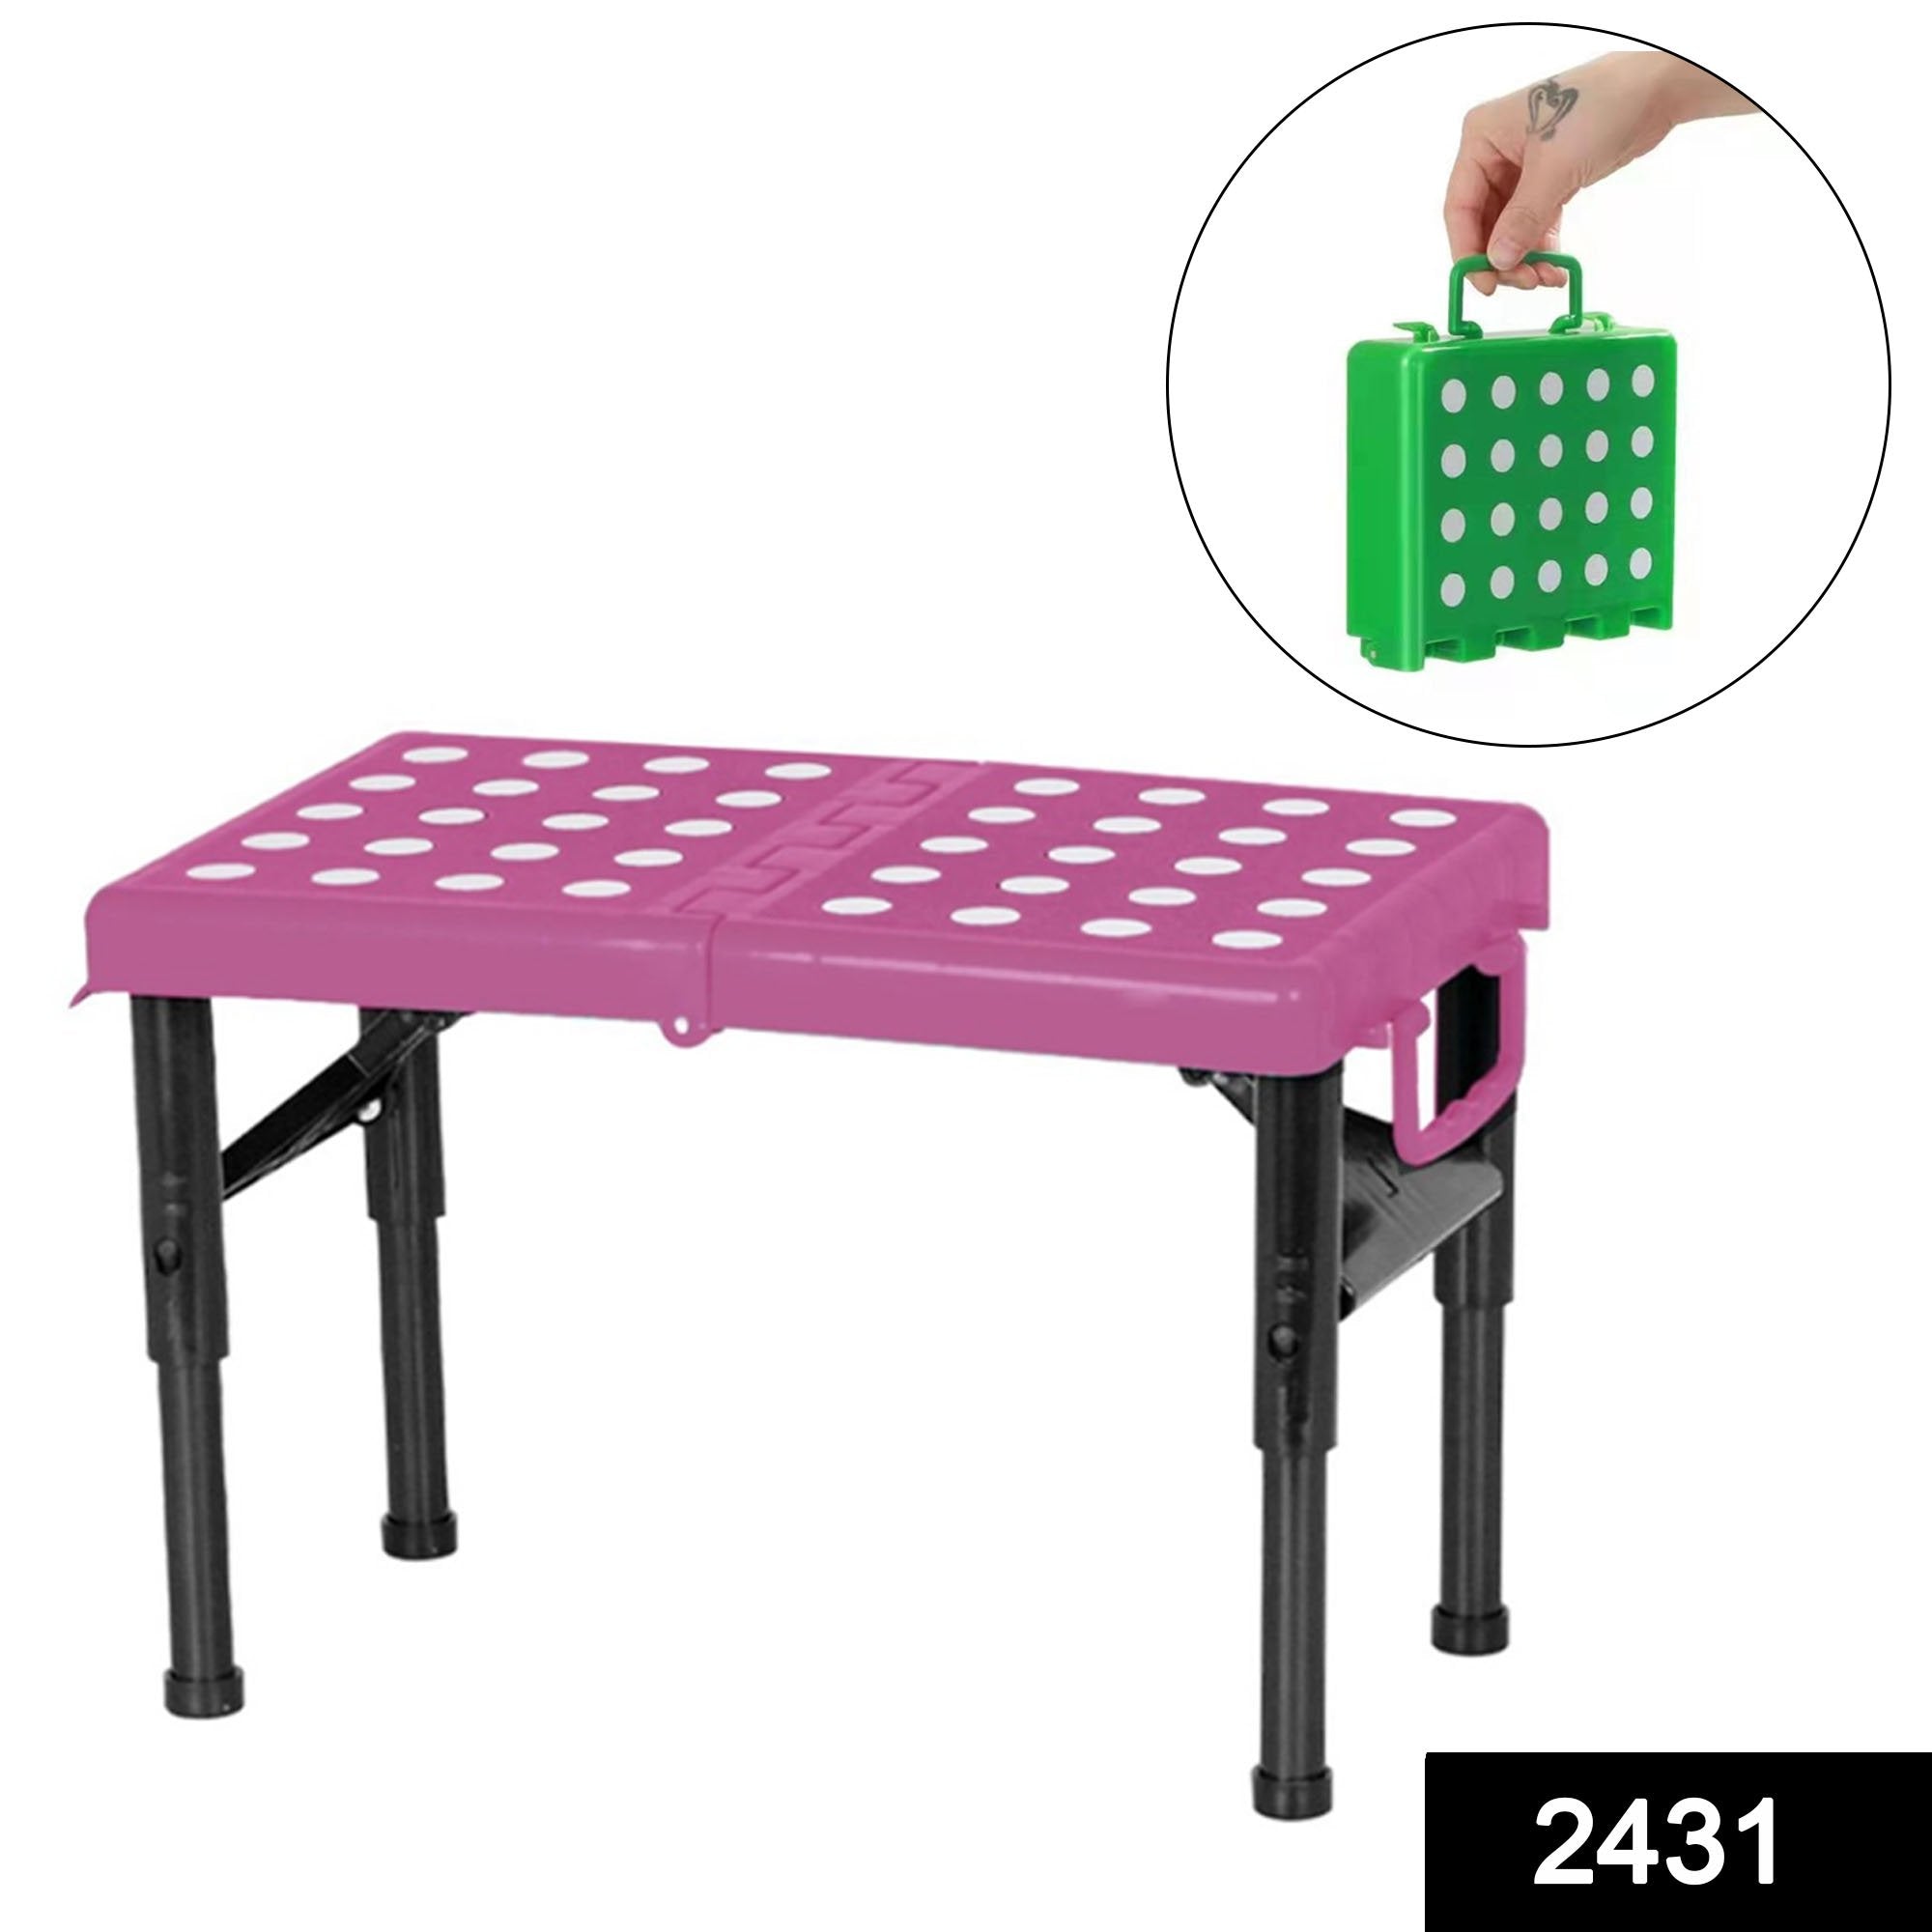 2431 High Quality Multi-Utility Compact Foldable Table